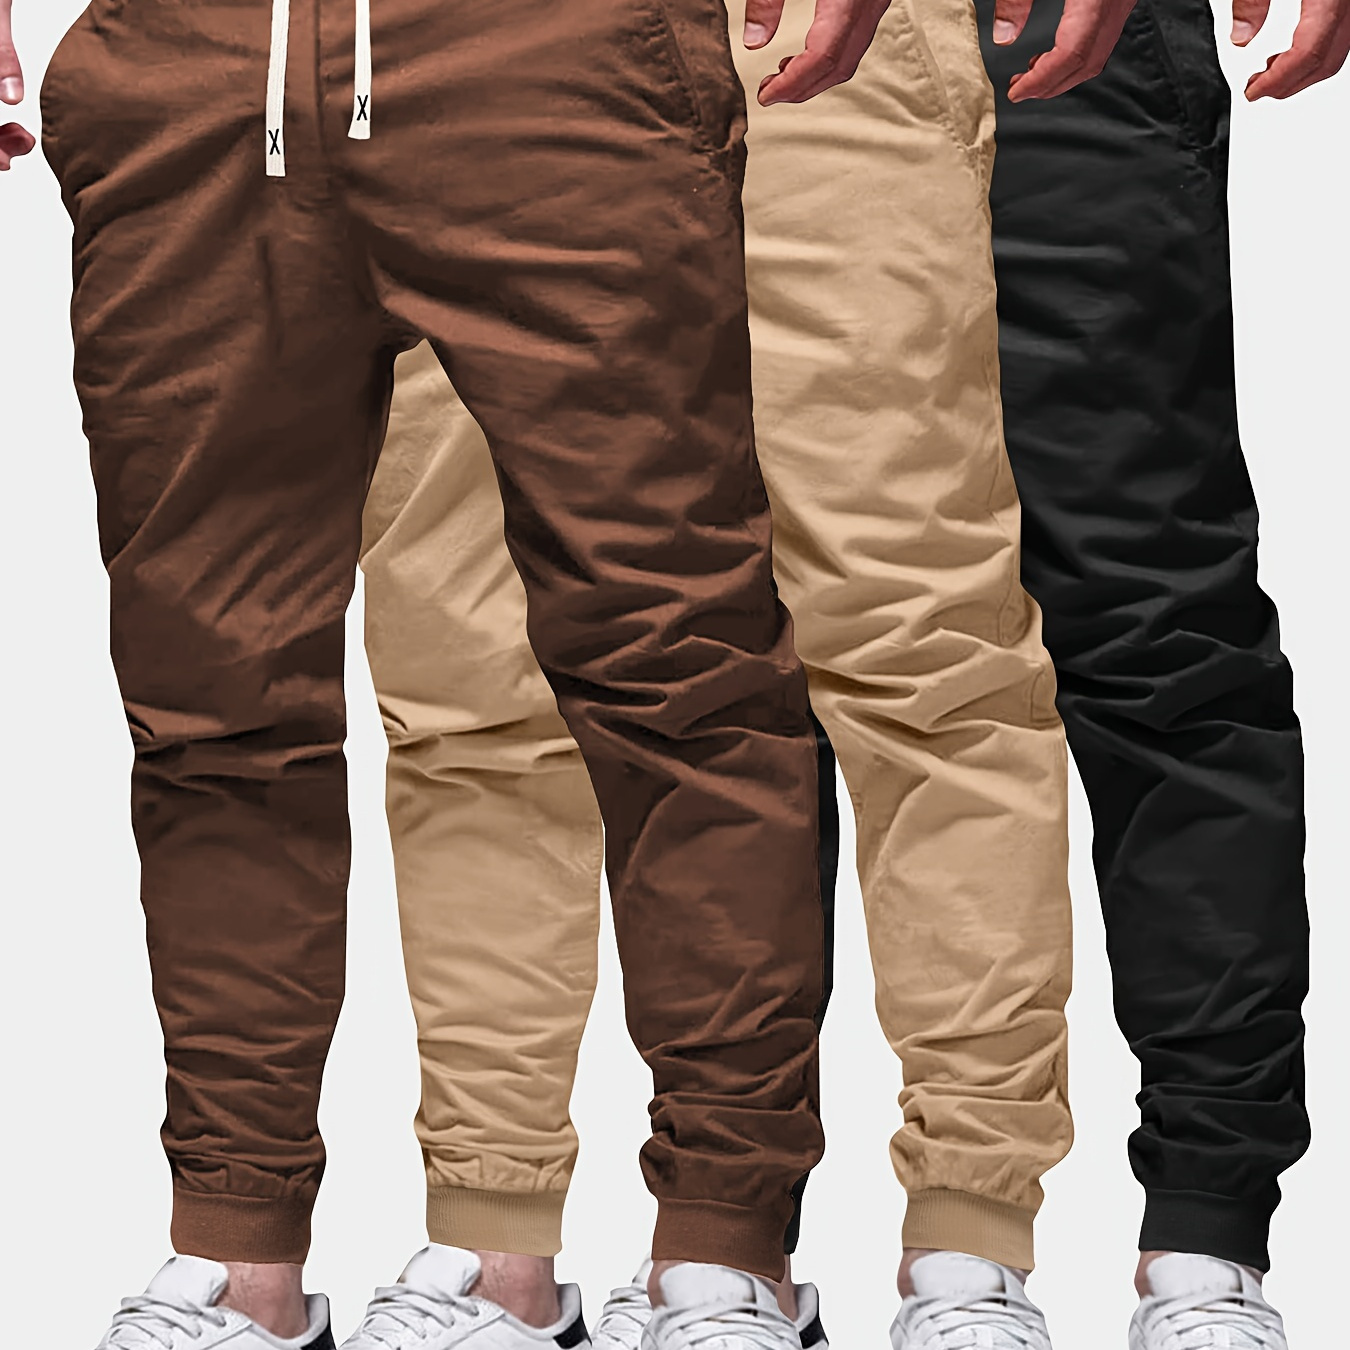 

3-piece Men's Spring And Autumn Regular Fit Fashion Trousers And Sweatpants For Casual Sports And Outdoor Pockets Elastic Waist Drawstring Trousers